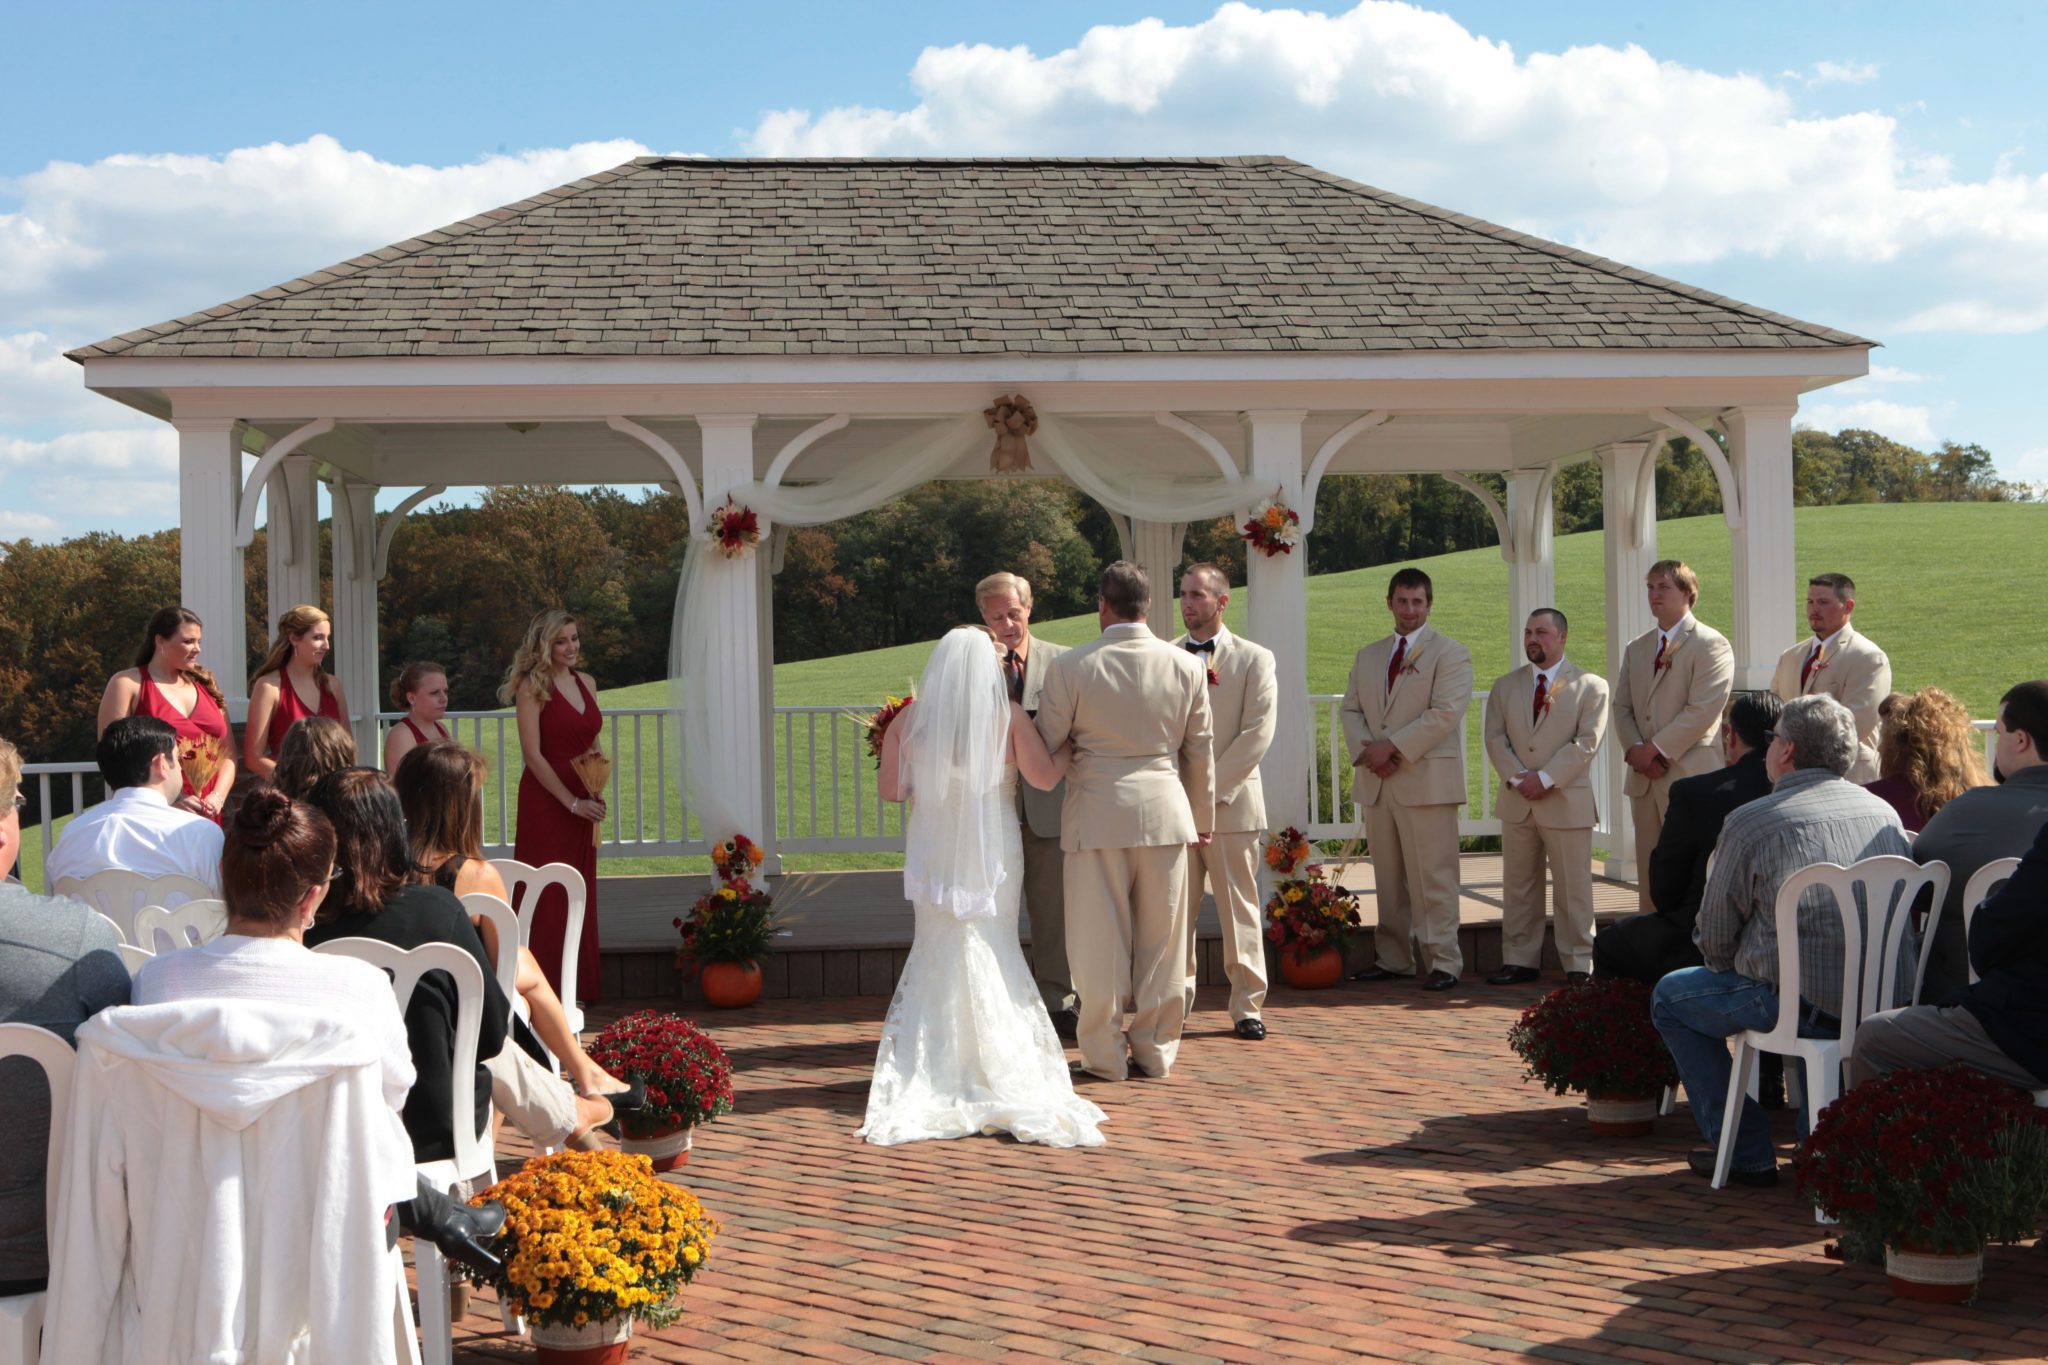 Outdoor wedding ceremony is held on covered pavilion